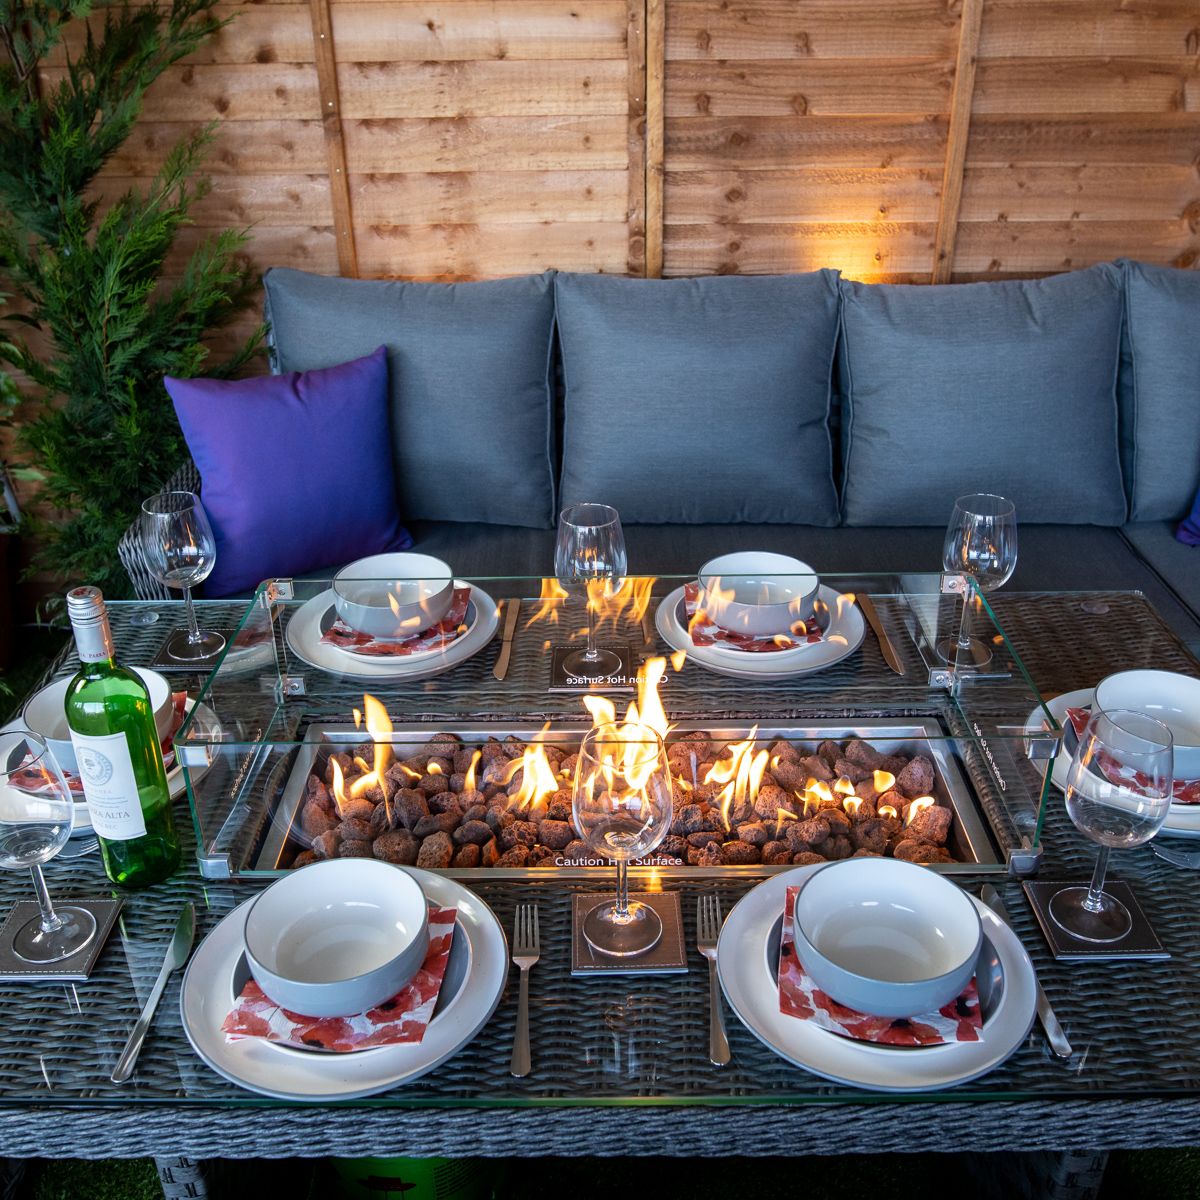 Why should I Invest in Garden Furniture?